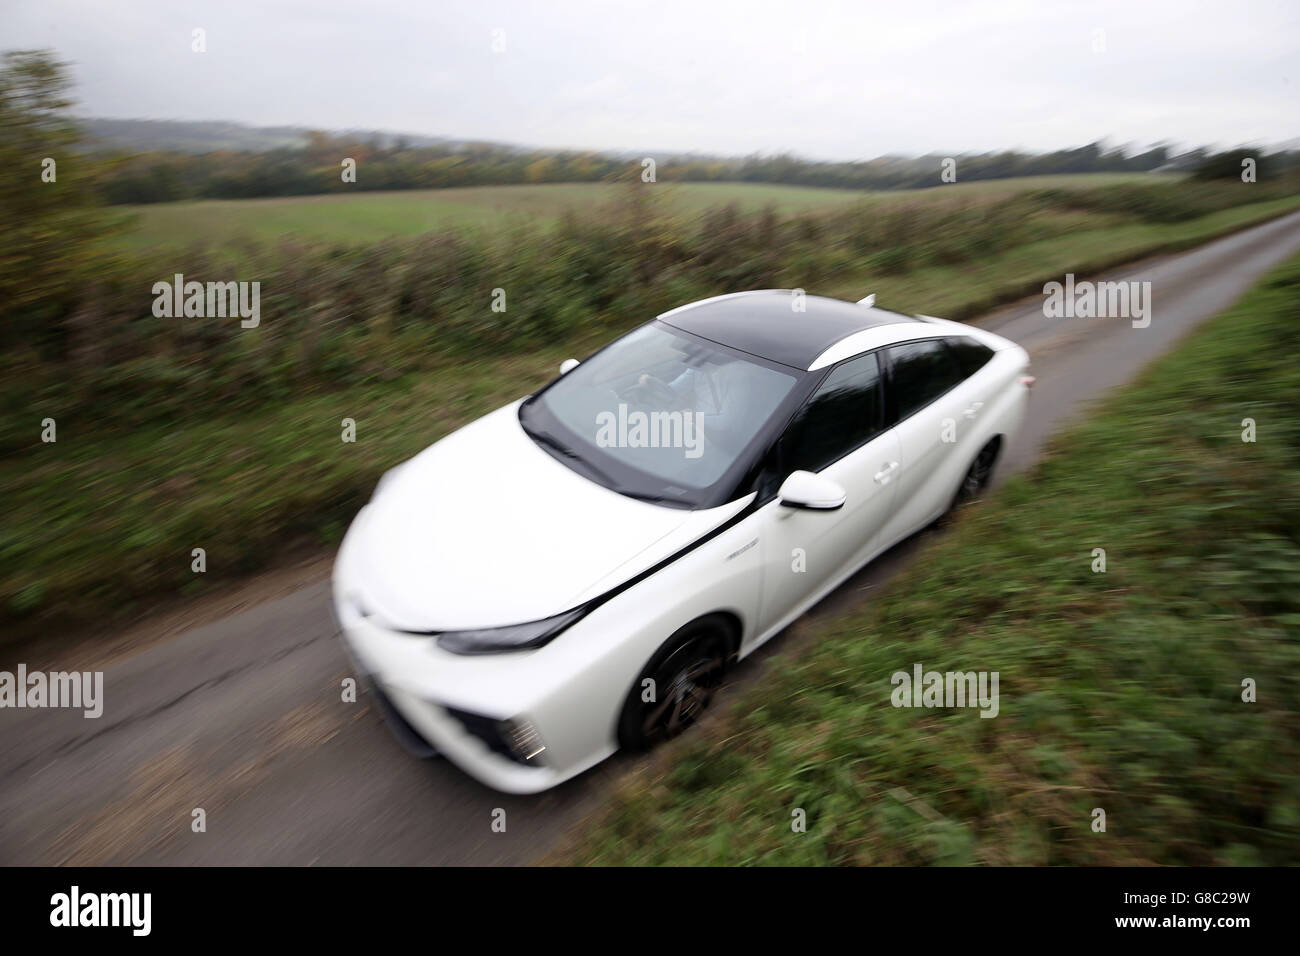 The first mass production dedicated Hydrogen fuel cell vehicle, the Toyota Mirai, goes through it paces in Denham, Buckinghamshire. Stock Photo